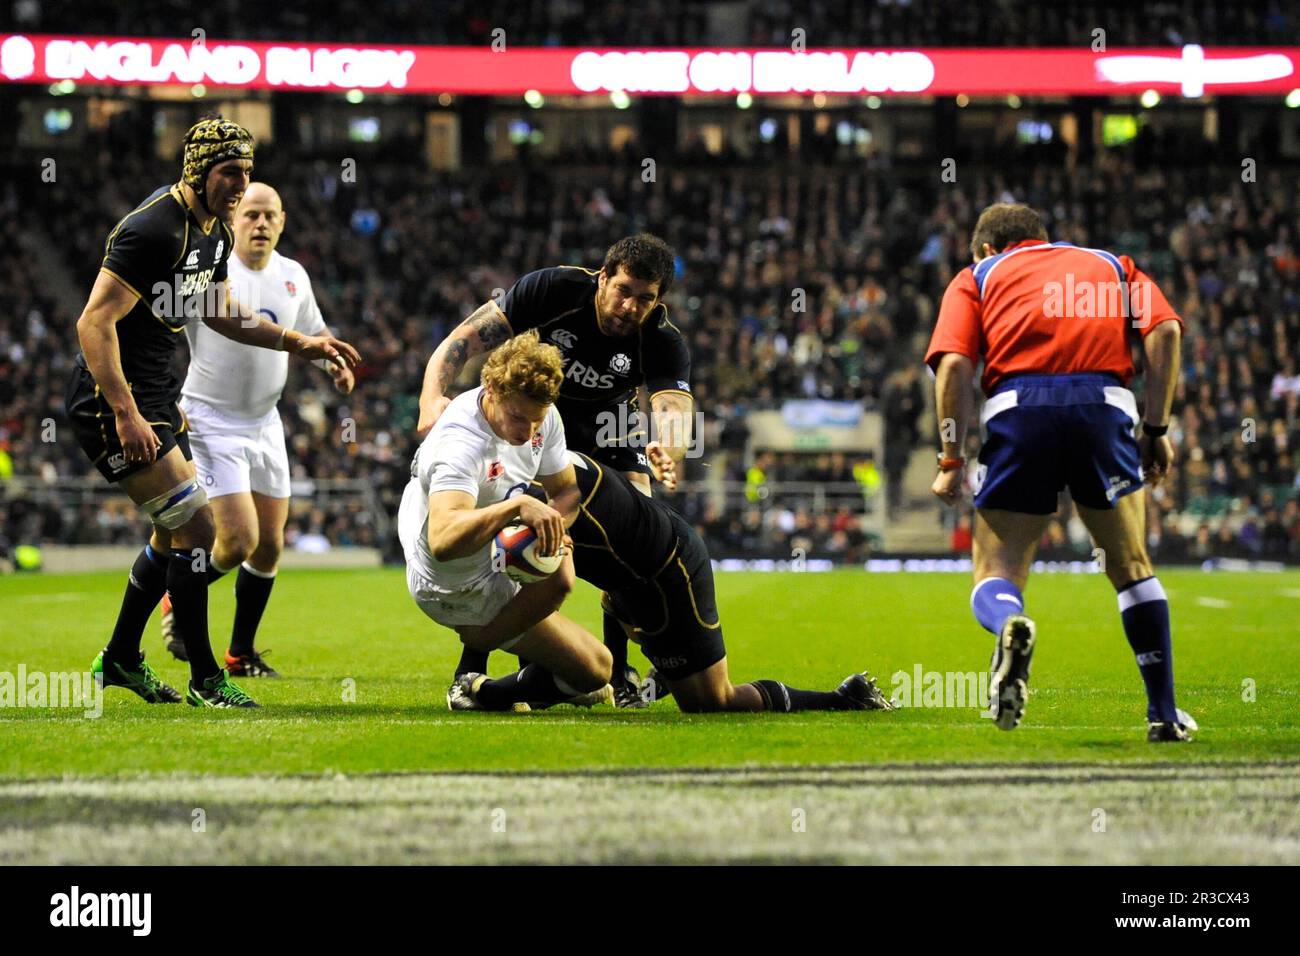 Billy Twelvetrees of England dives over to score a try on his debut during the RBS 6 Nations match between England and Scotland at Twickenham on Satur Stock Photo